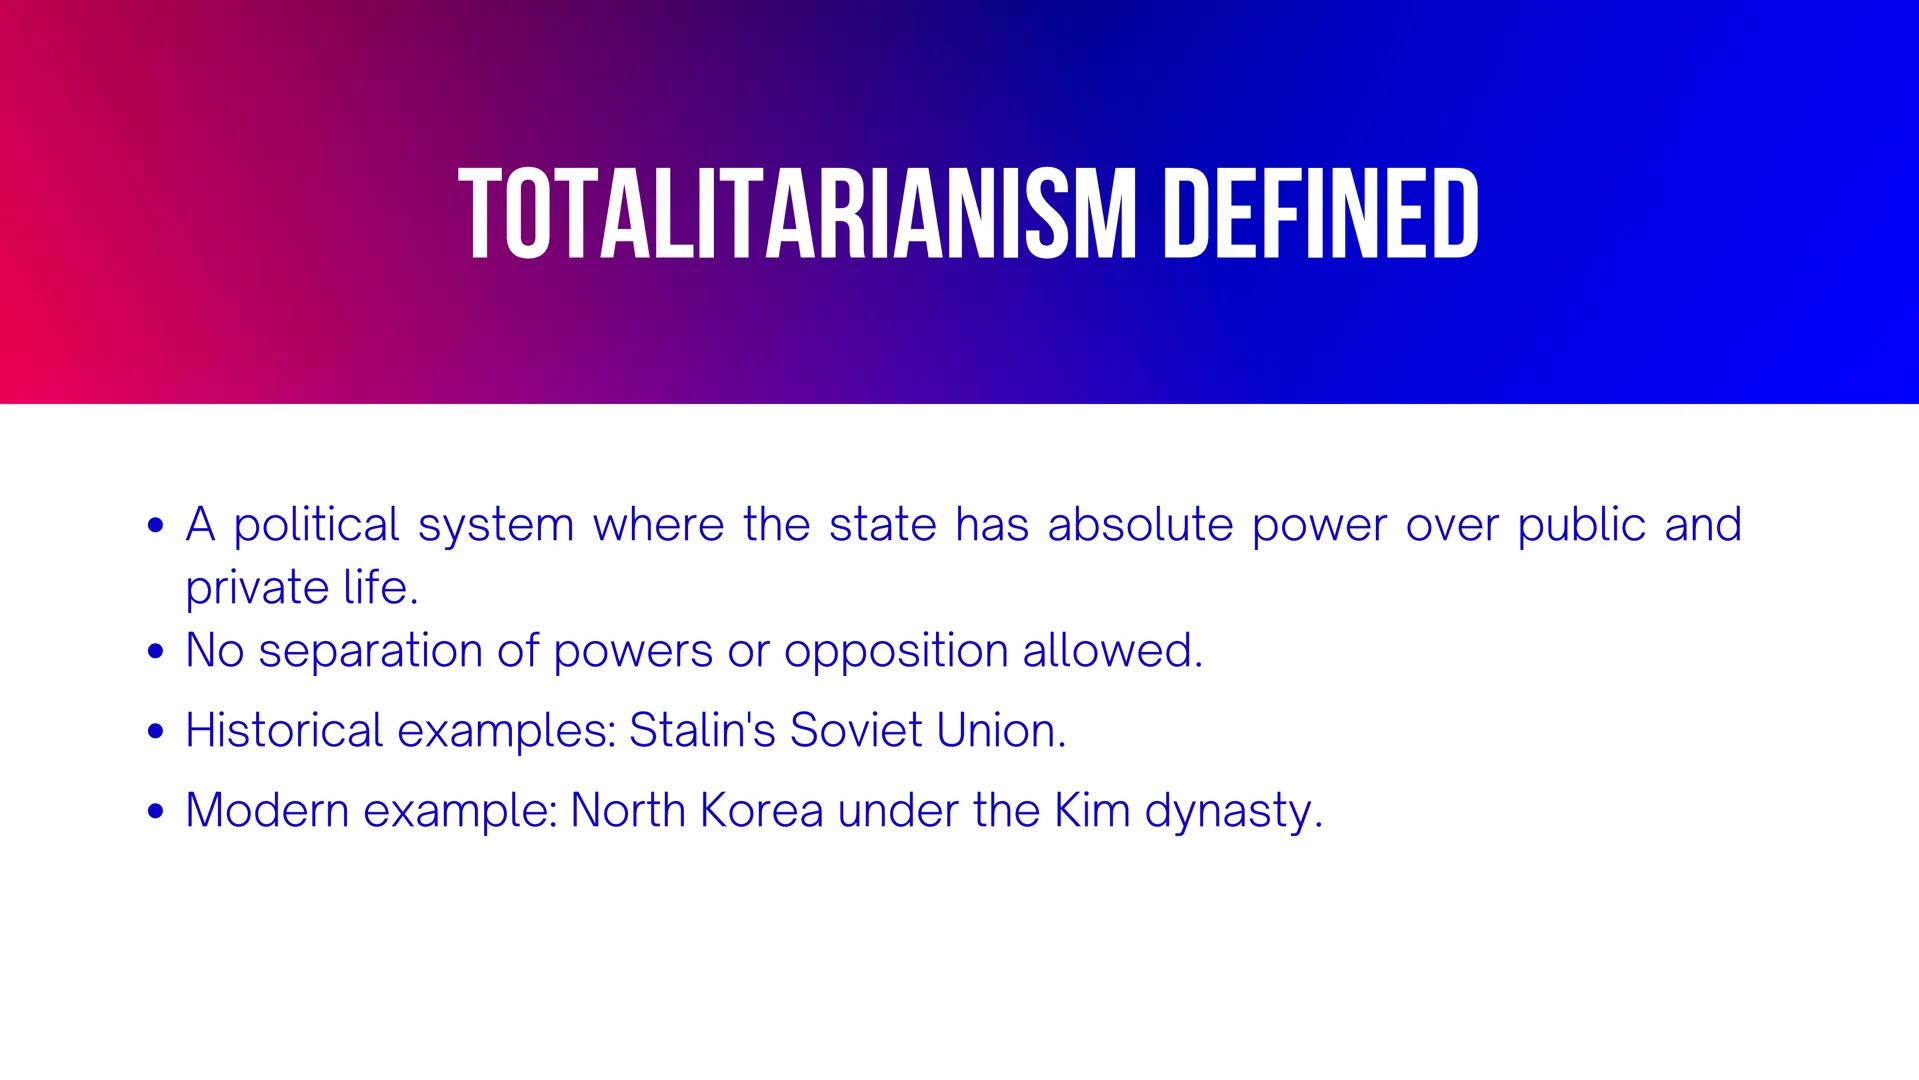 THE CIRCLE AS A
TOTALITARIAN REGIME
Made by Shyrokova Yevheniia TOTALITARIANISM DEFINED
• A political system where the state has absolute po